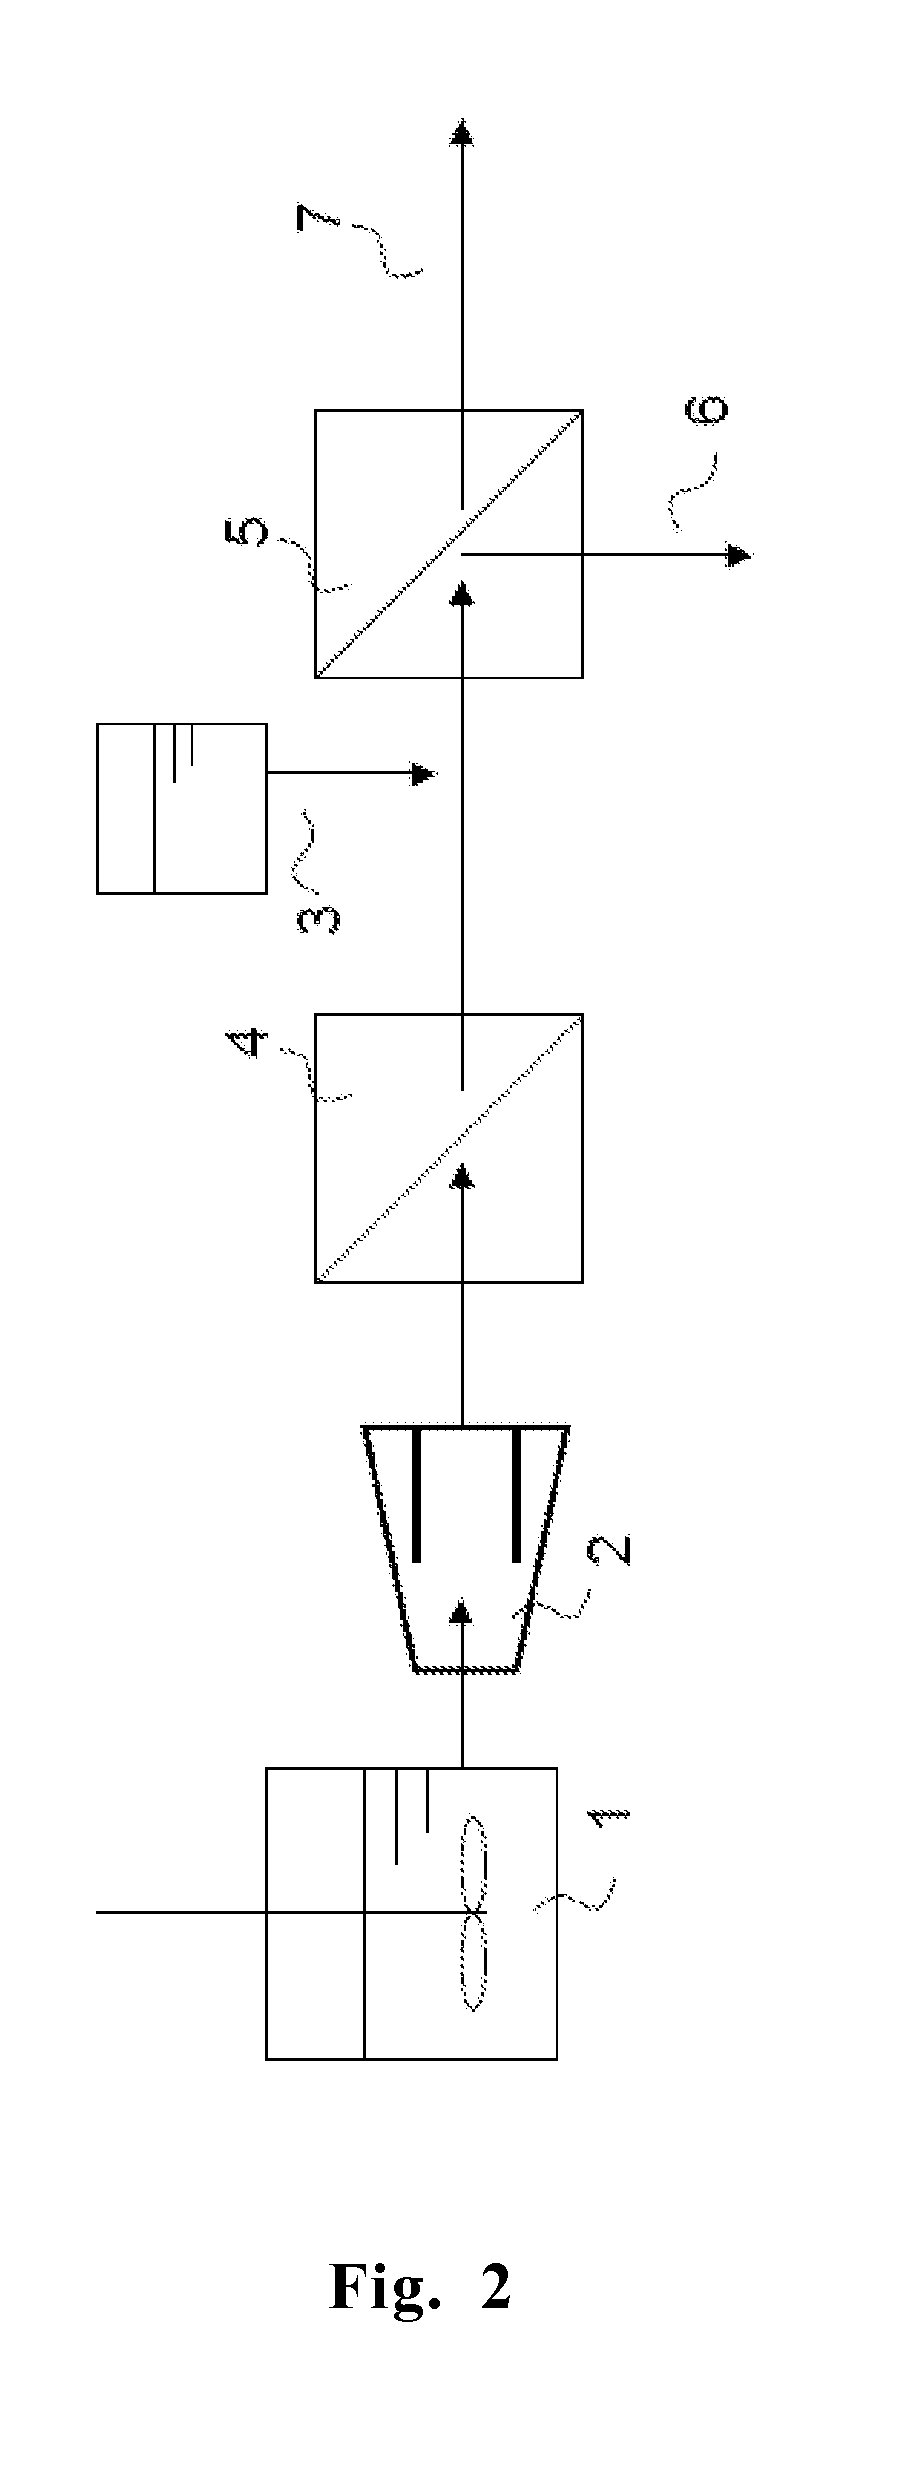 Method for manufacturing sugar solution